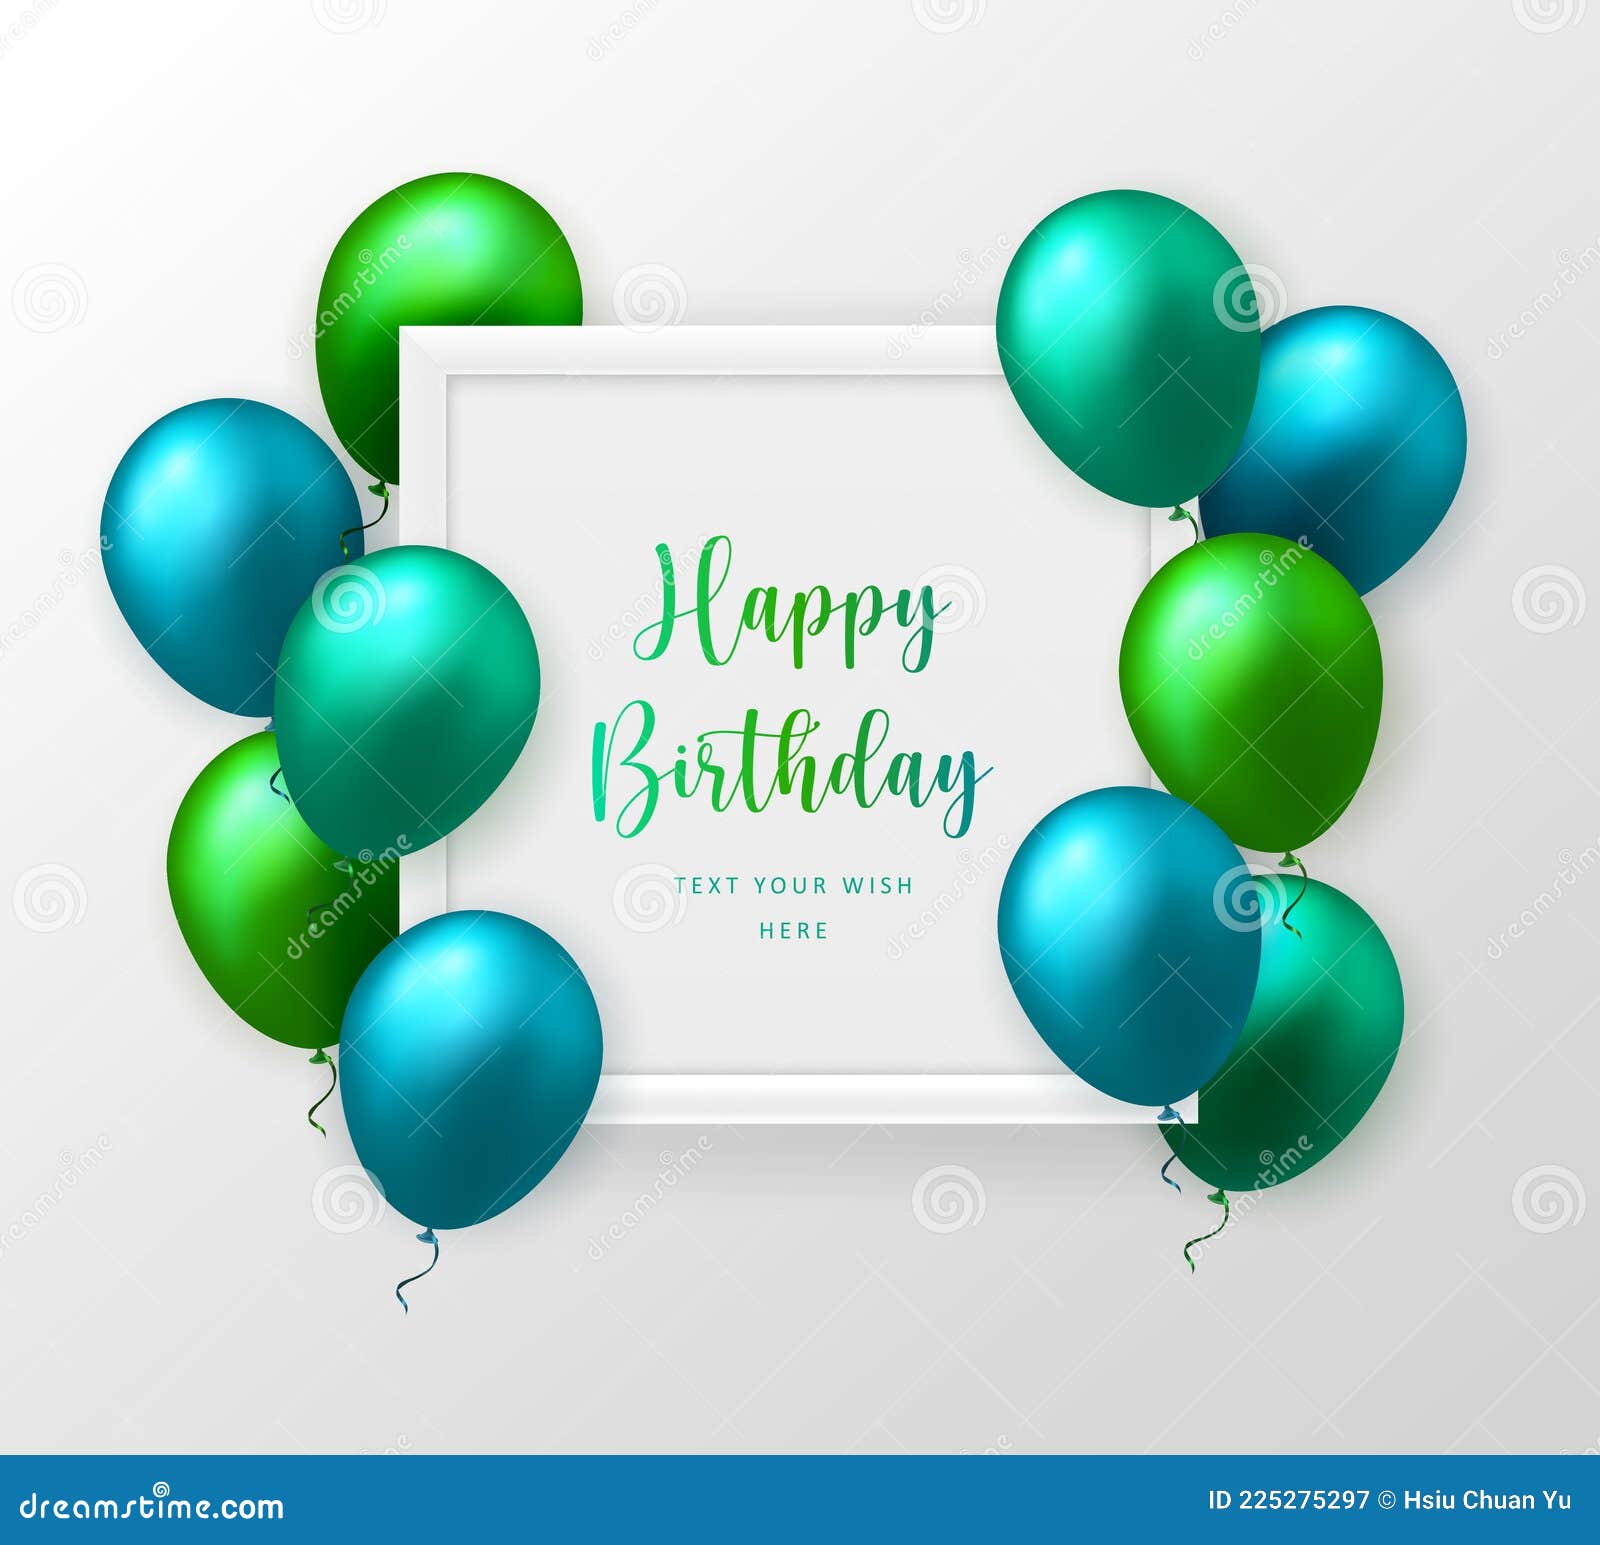 3D Realistic Emerald Green Blue Ballon and Frame Happy Birthday Celebration  Card Banner Template Background Stock Vector - Illustration of birthday,  emerald: 225275297